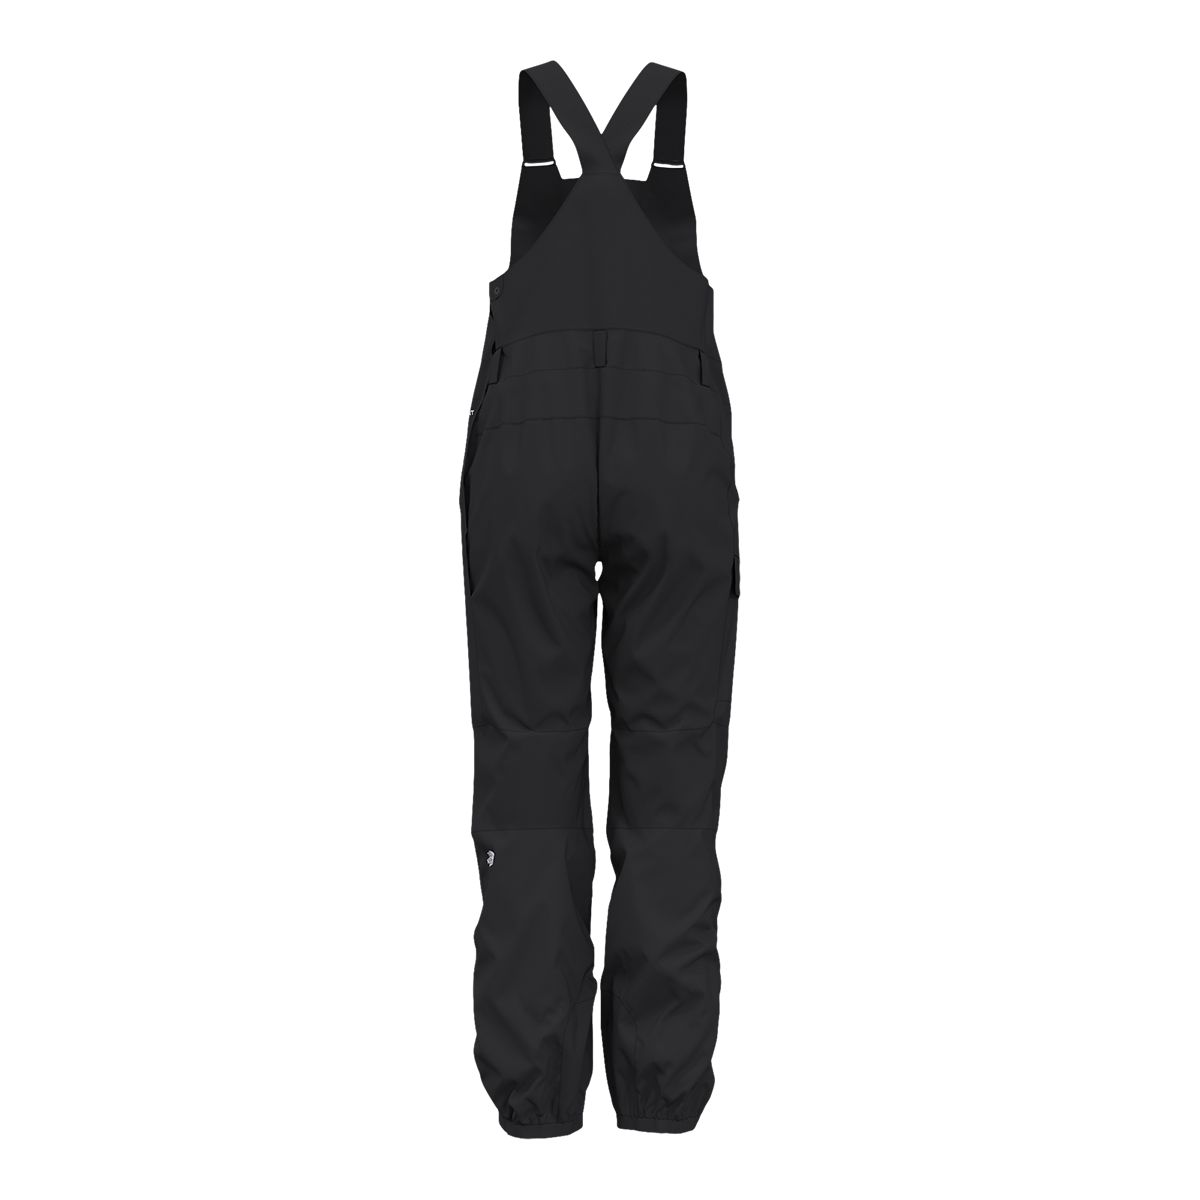 https://media-www.atmosphere.ca/product/div-03-softgoods/dpt-76-outerwear/sdpt-02-womens/333504497/tnf-women-s-freedom-bib-insul-black-xs--e98a428c-b5c3-41e4-843b-4ad4f7a14b64-jpgrendition.jpg?imdensity=1&imwidth=1244&impolicy=mZoom